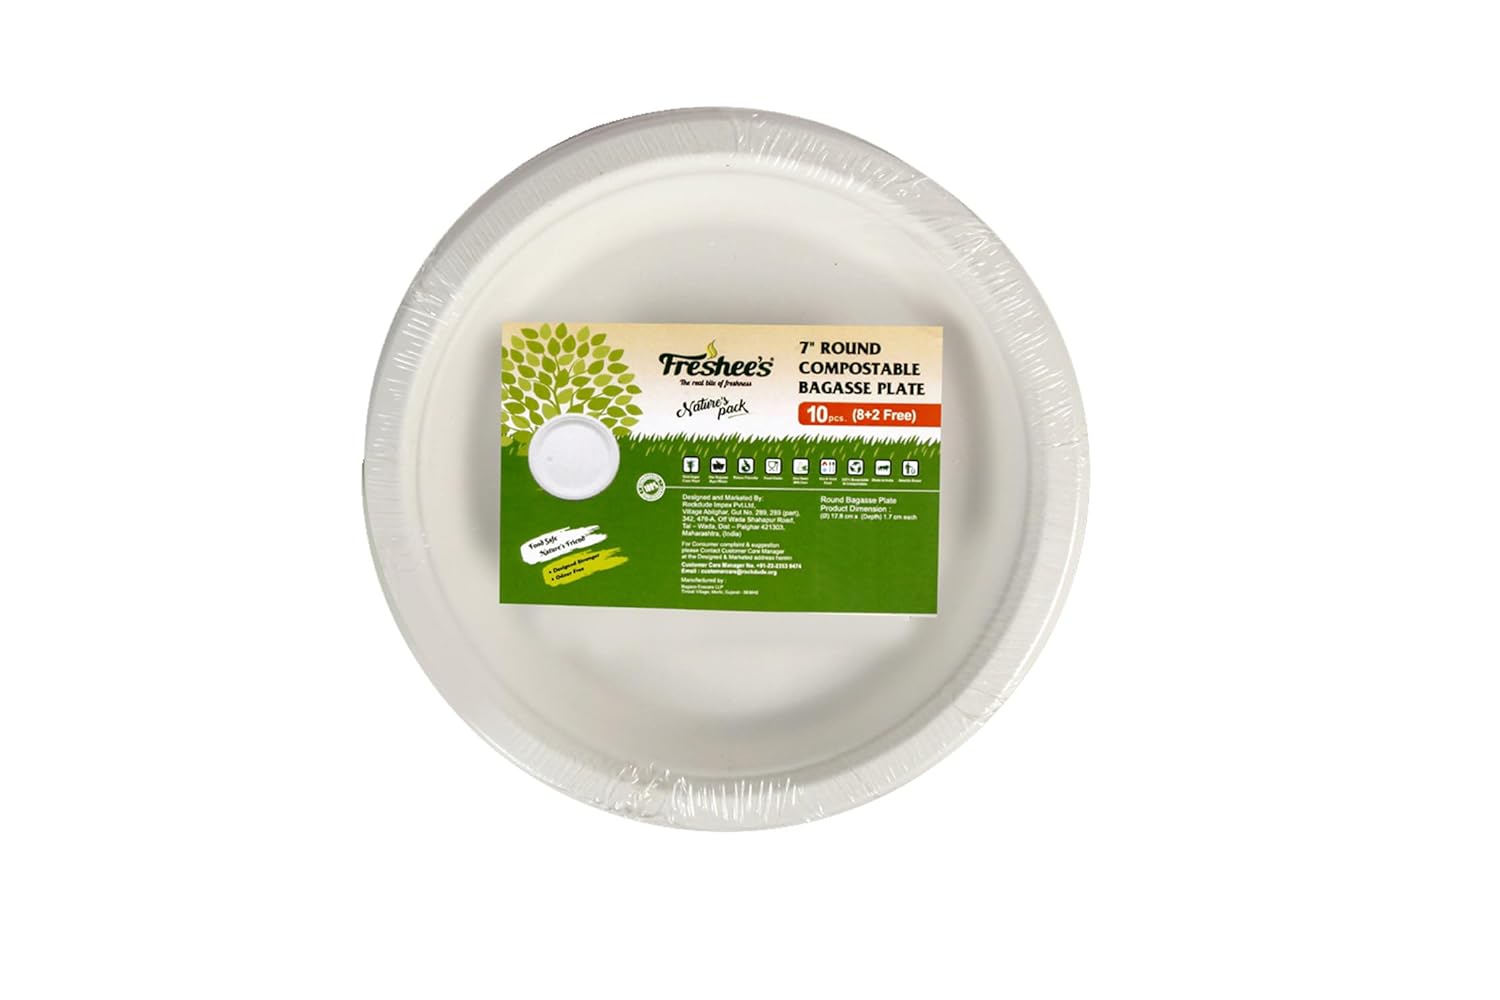 Freshee 7 Round Compostable Bagasse Plate